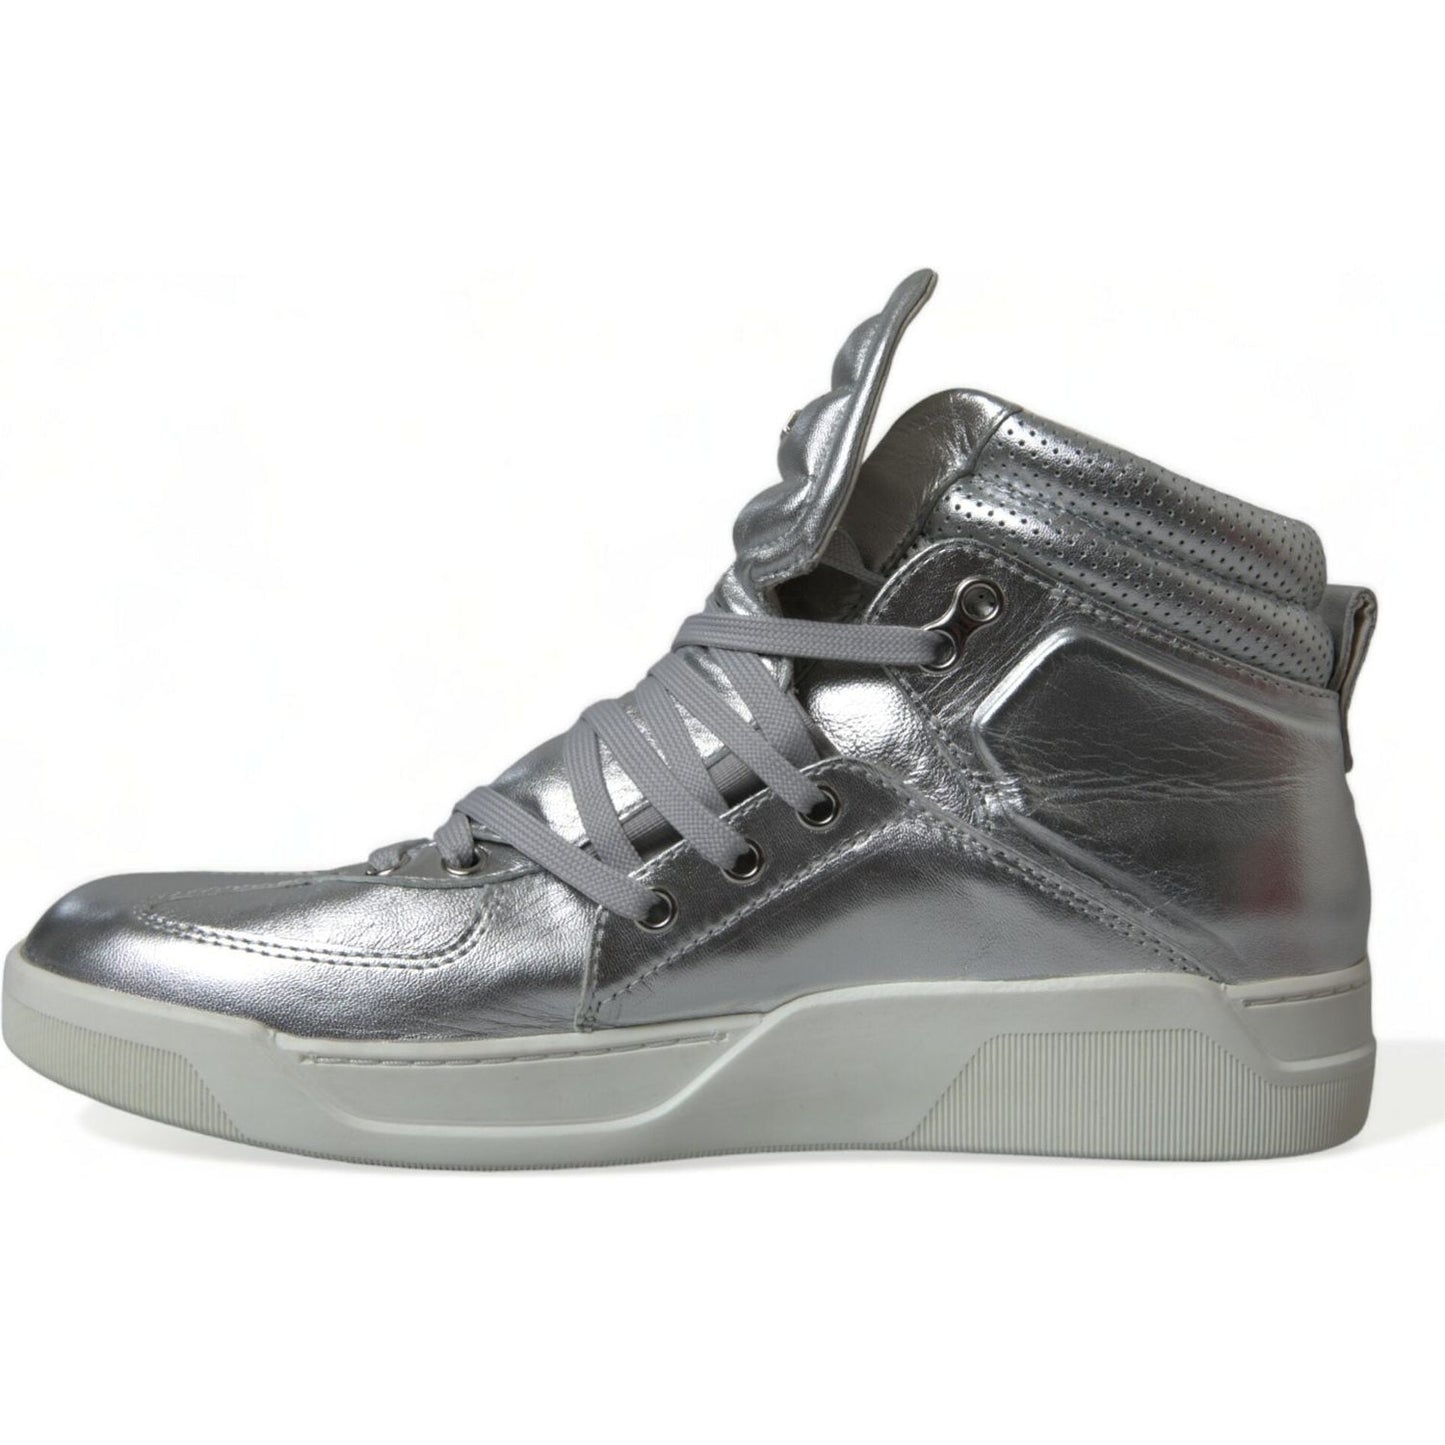 Dolce & Gabbana | Silver Leather High-Top Sneakers| McRichard Designer Brands   